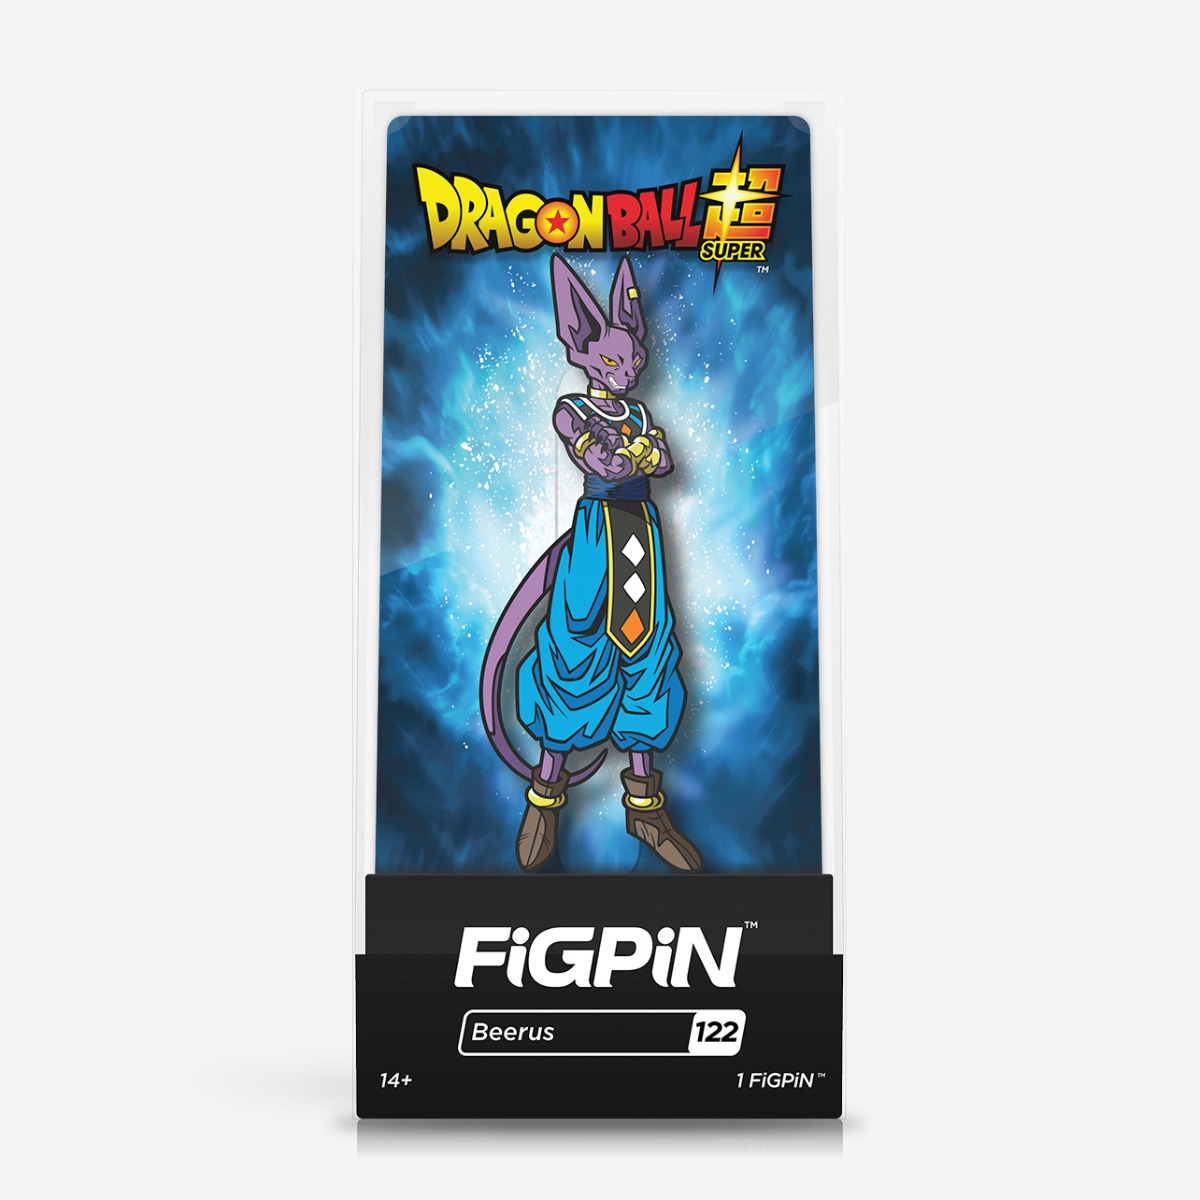 Dragon Ball Z - Beerus FiGPiN image count 1